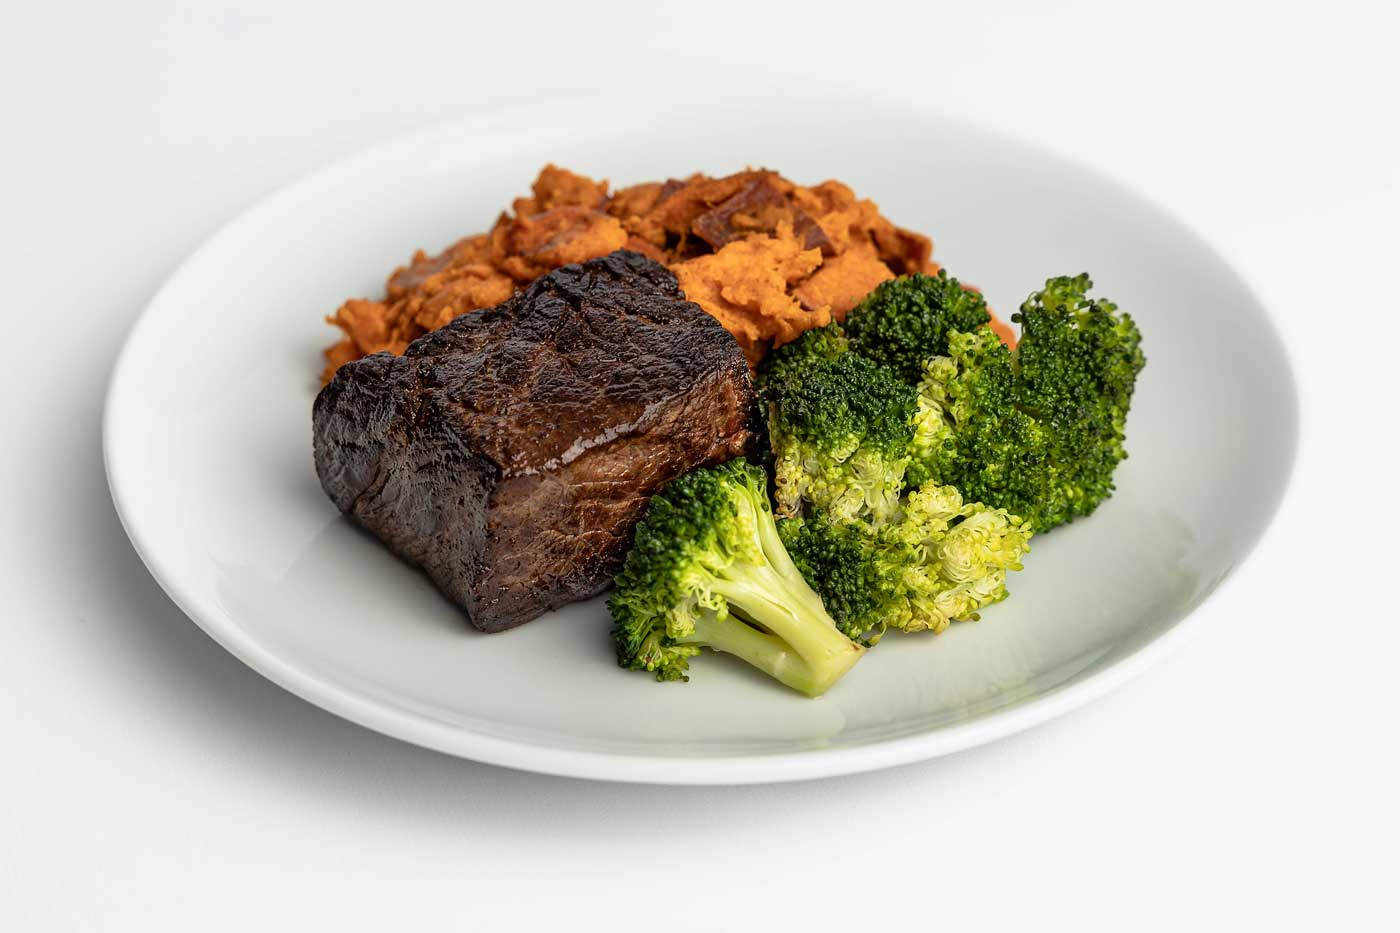 Paleo Meal Delivery Grass-Fed Steak with Mashed Sweet Potatoes and Broccoli